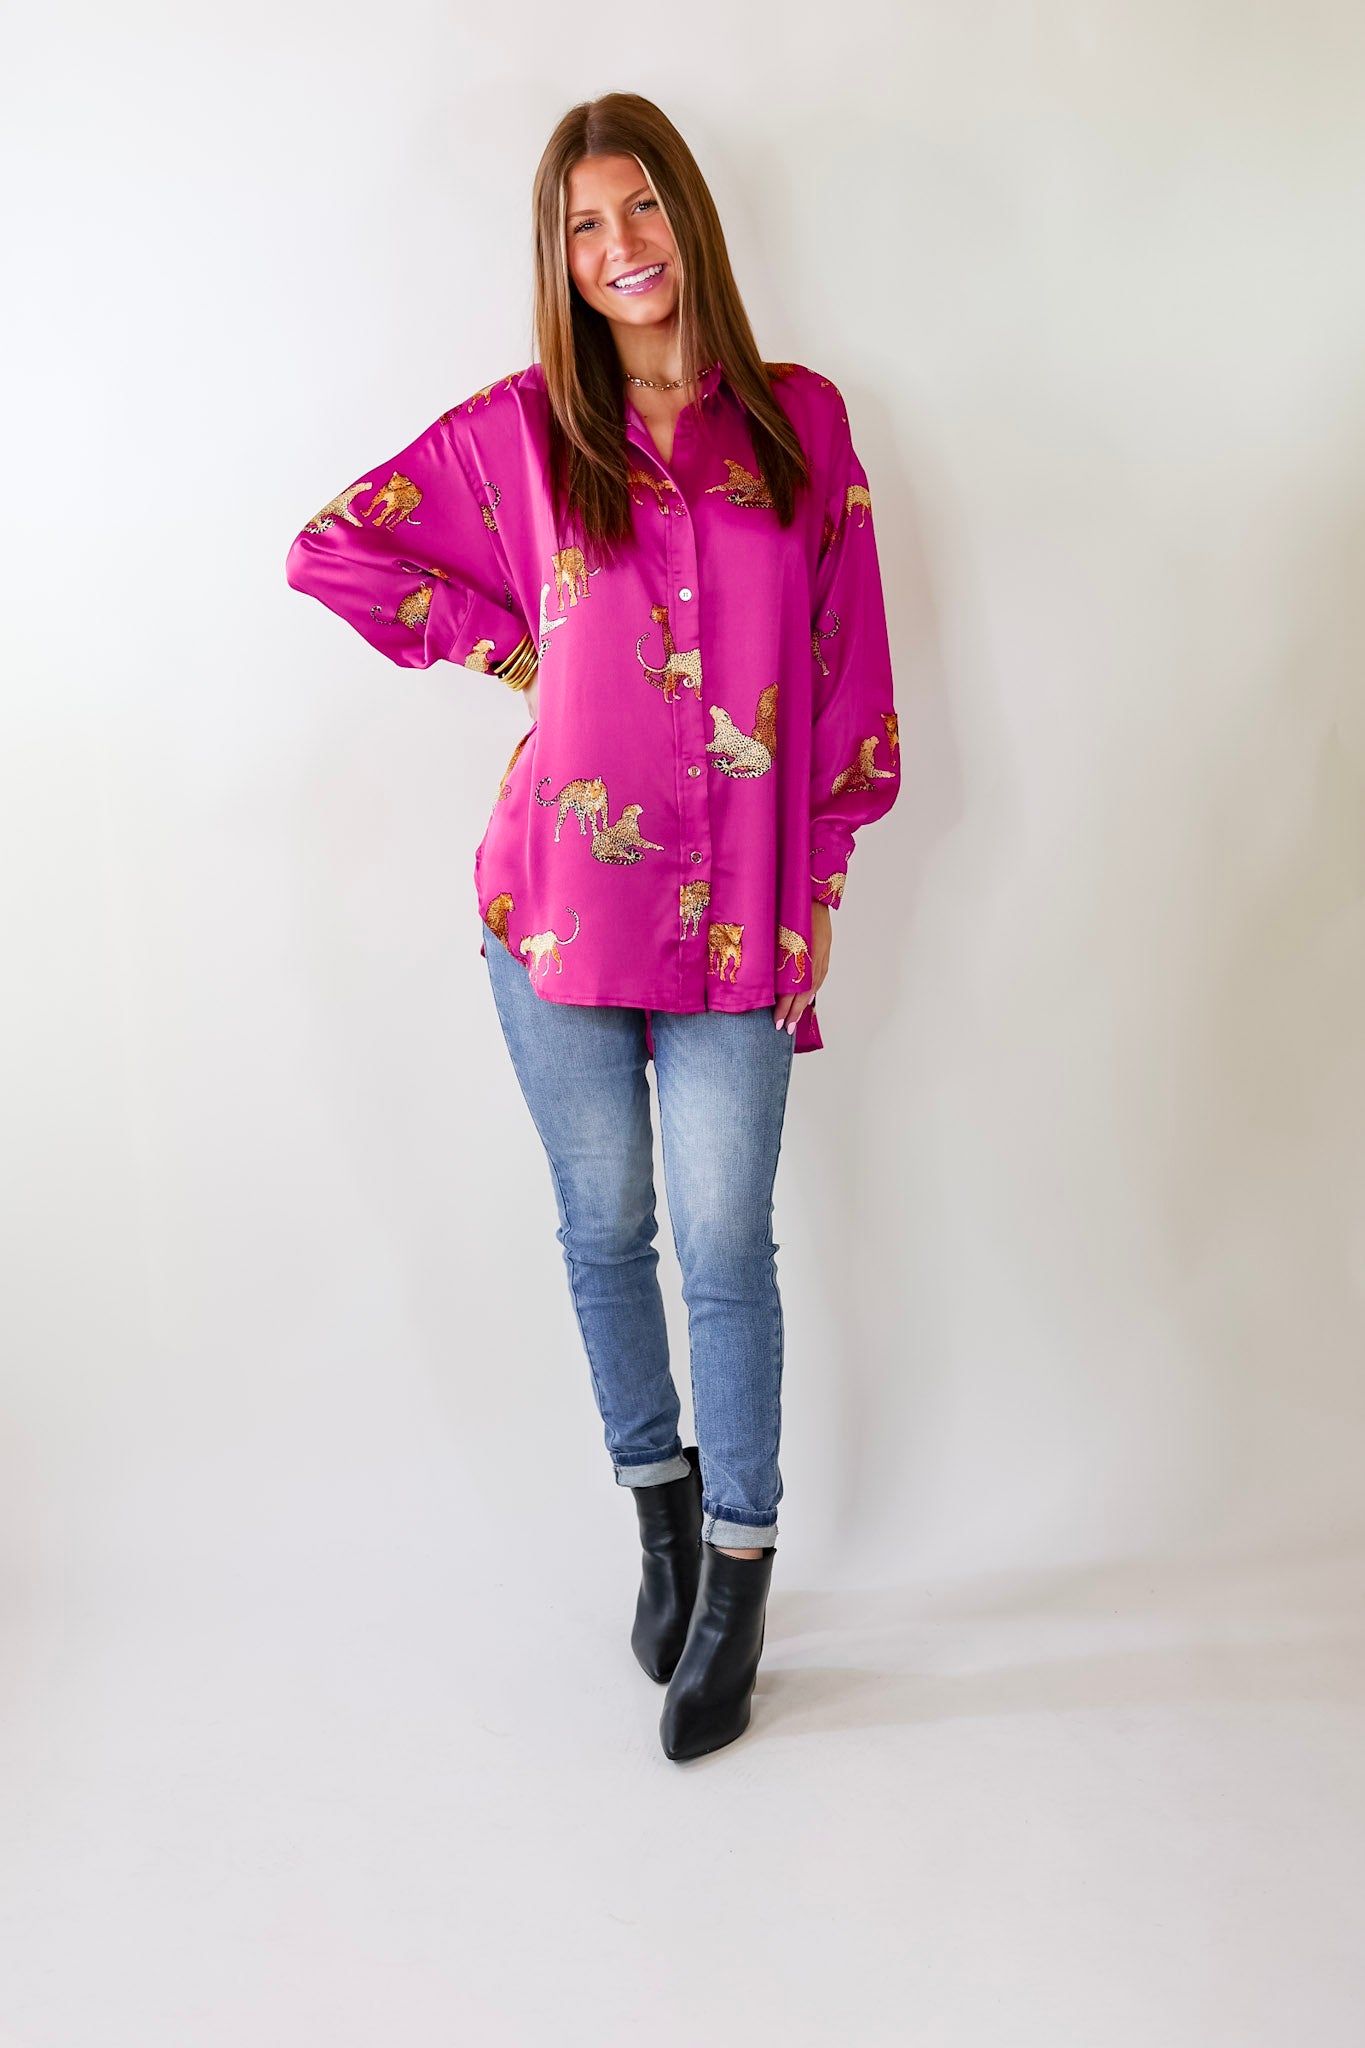 Tell Me Something Good Cheetah Print Long Sleeve Button Up Top in Magenta Pink